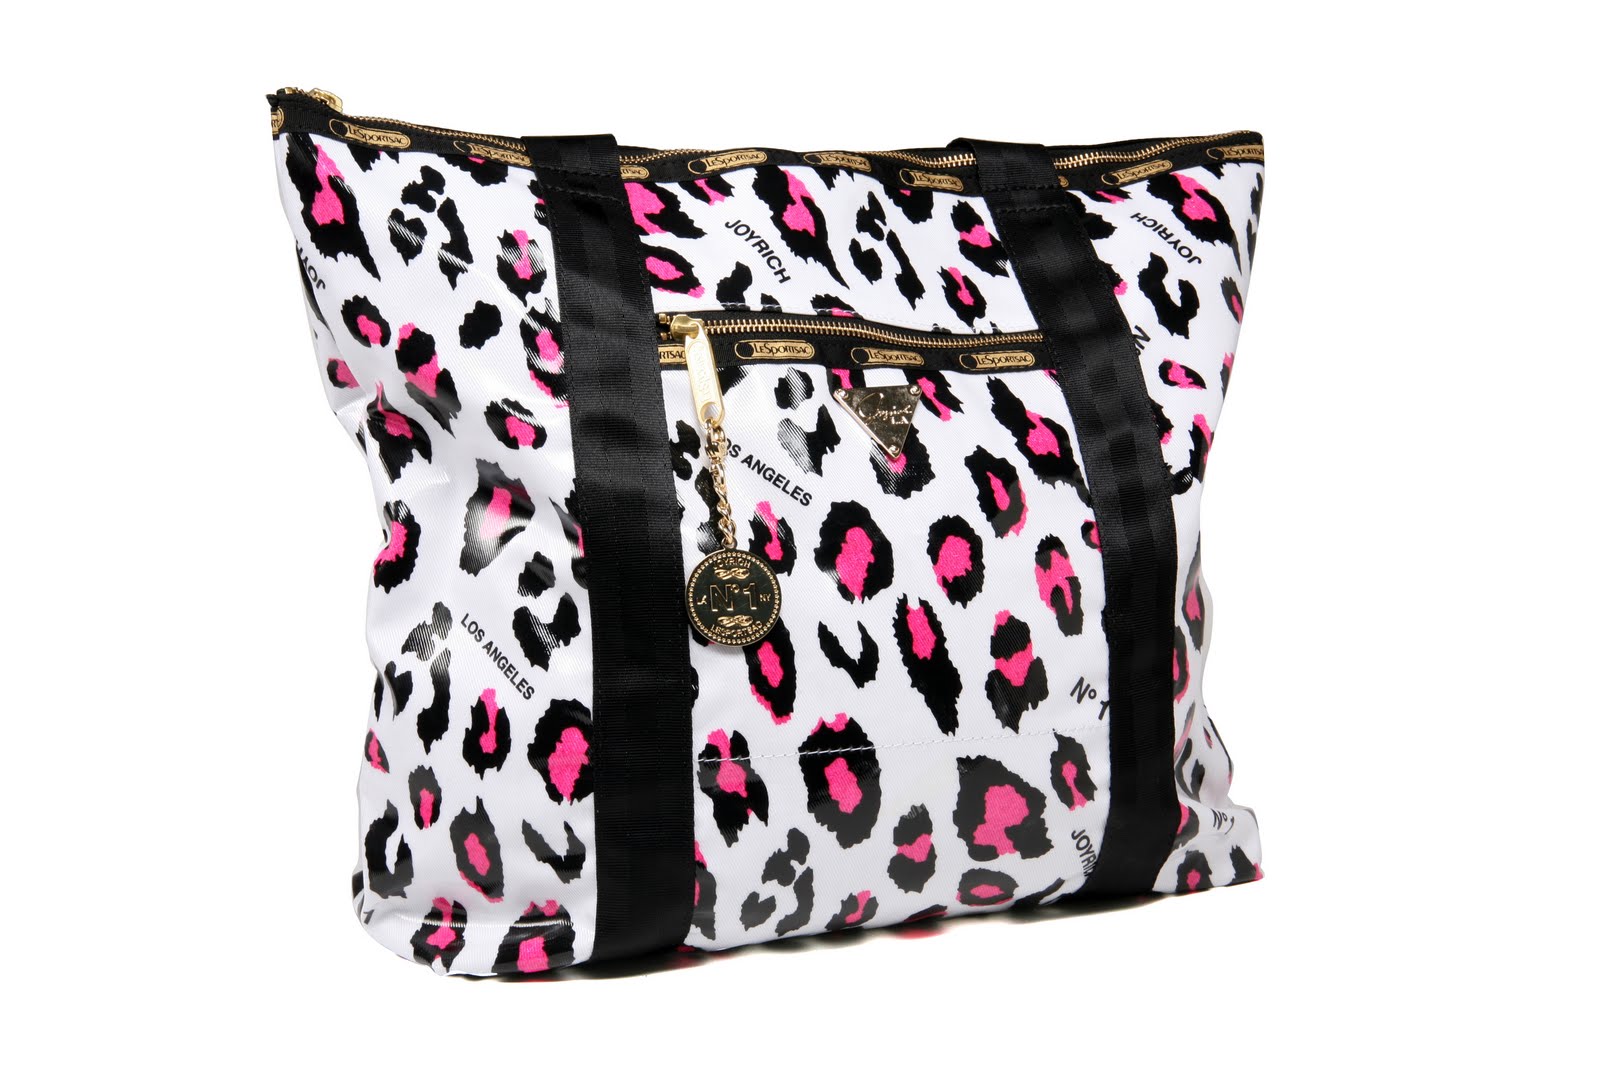 I Do Know! Never don't know ;): LeSportsac Partners with JOYRICH for